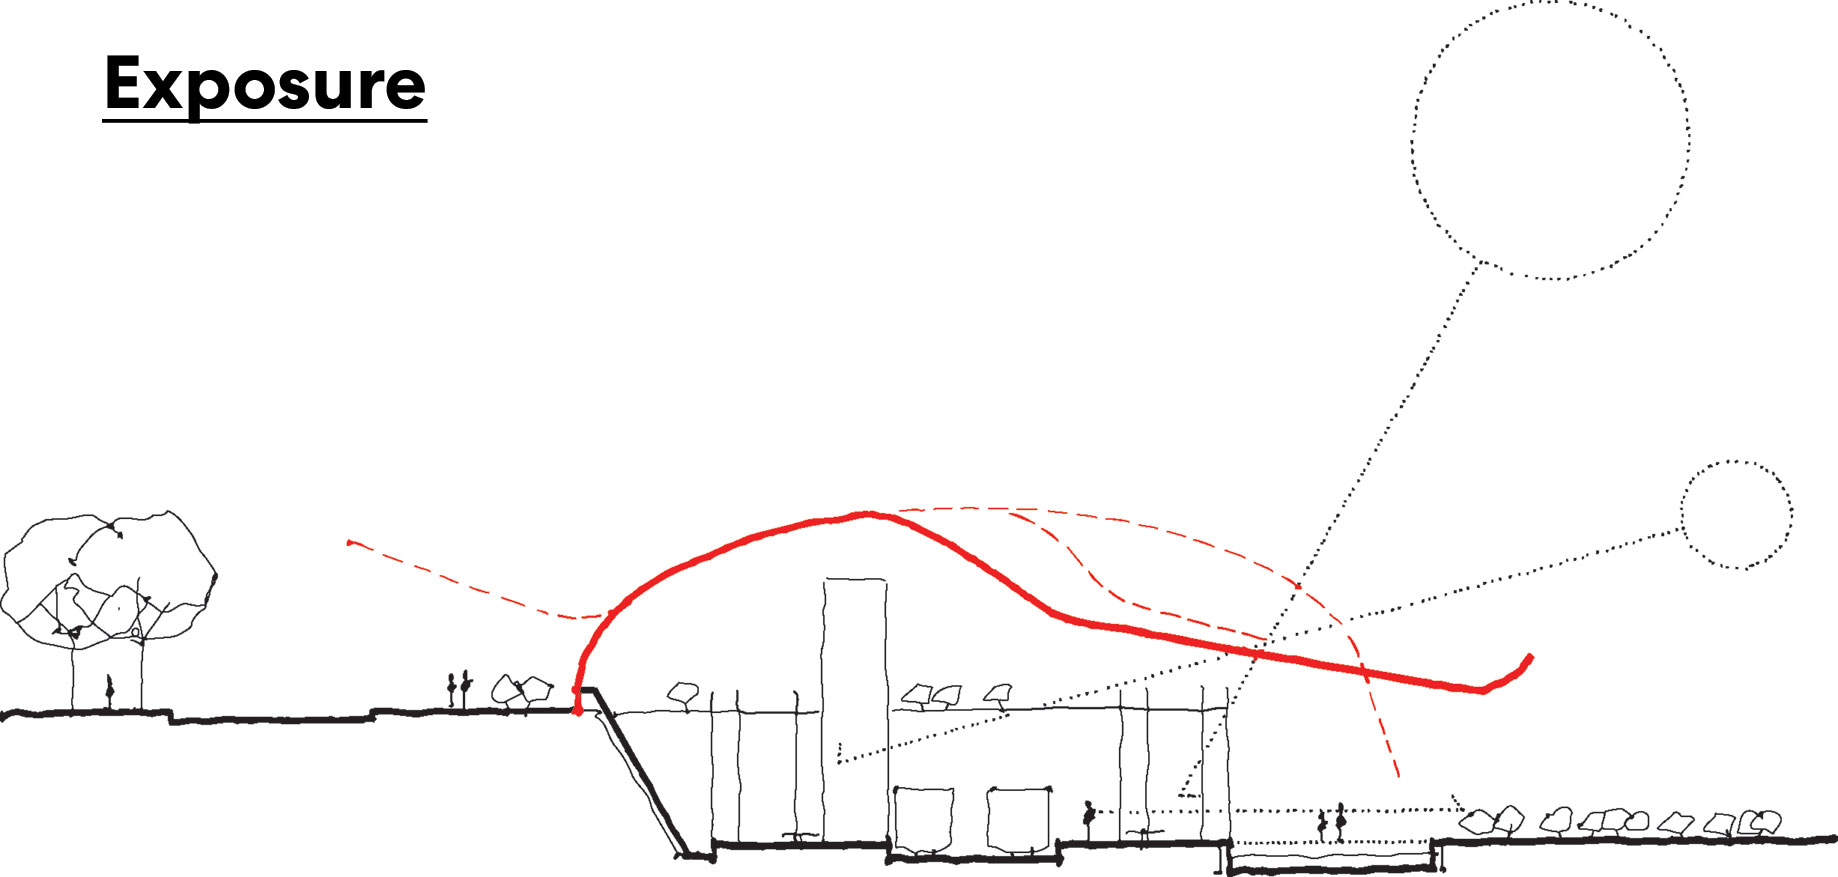 Sketch showing principal architectural elements of stations.